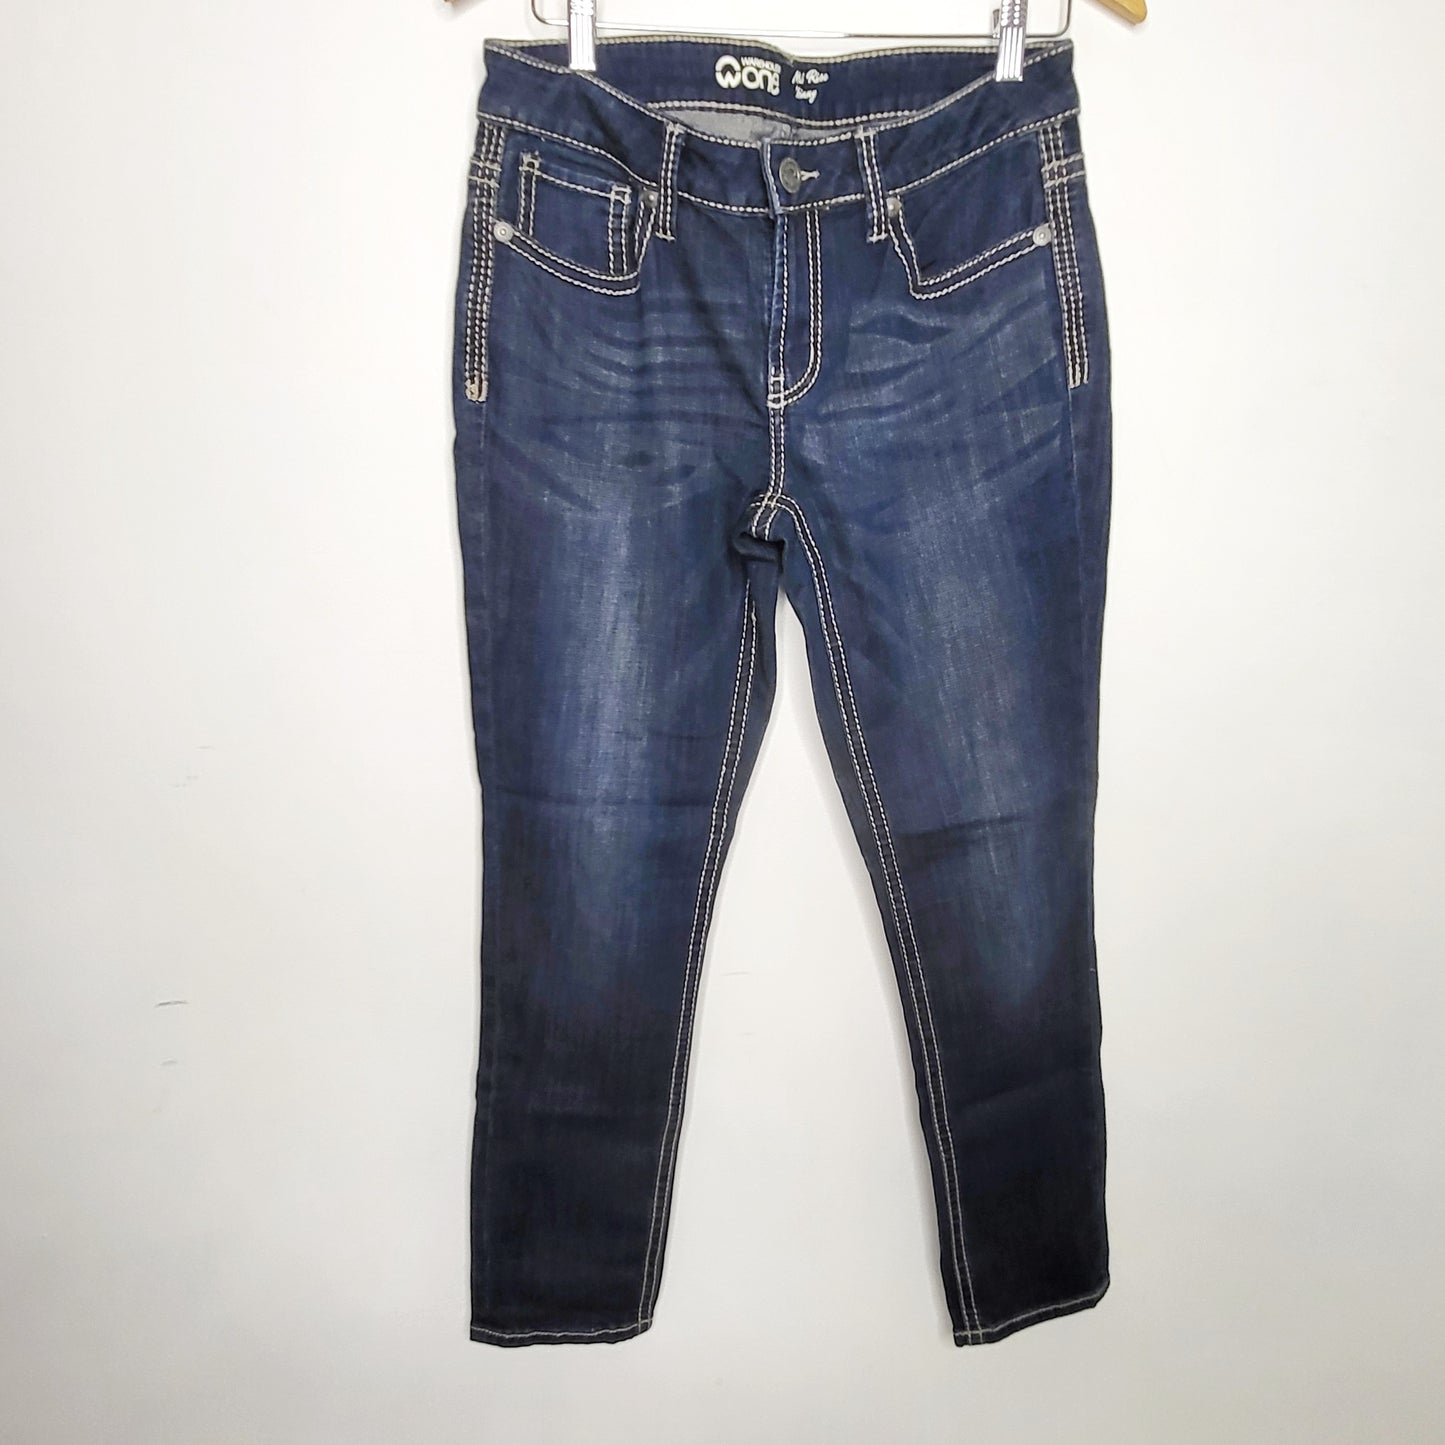 DZAV1 - Warehouse One mid rise skinny jeans, size 31 SHORT, good condition